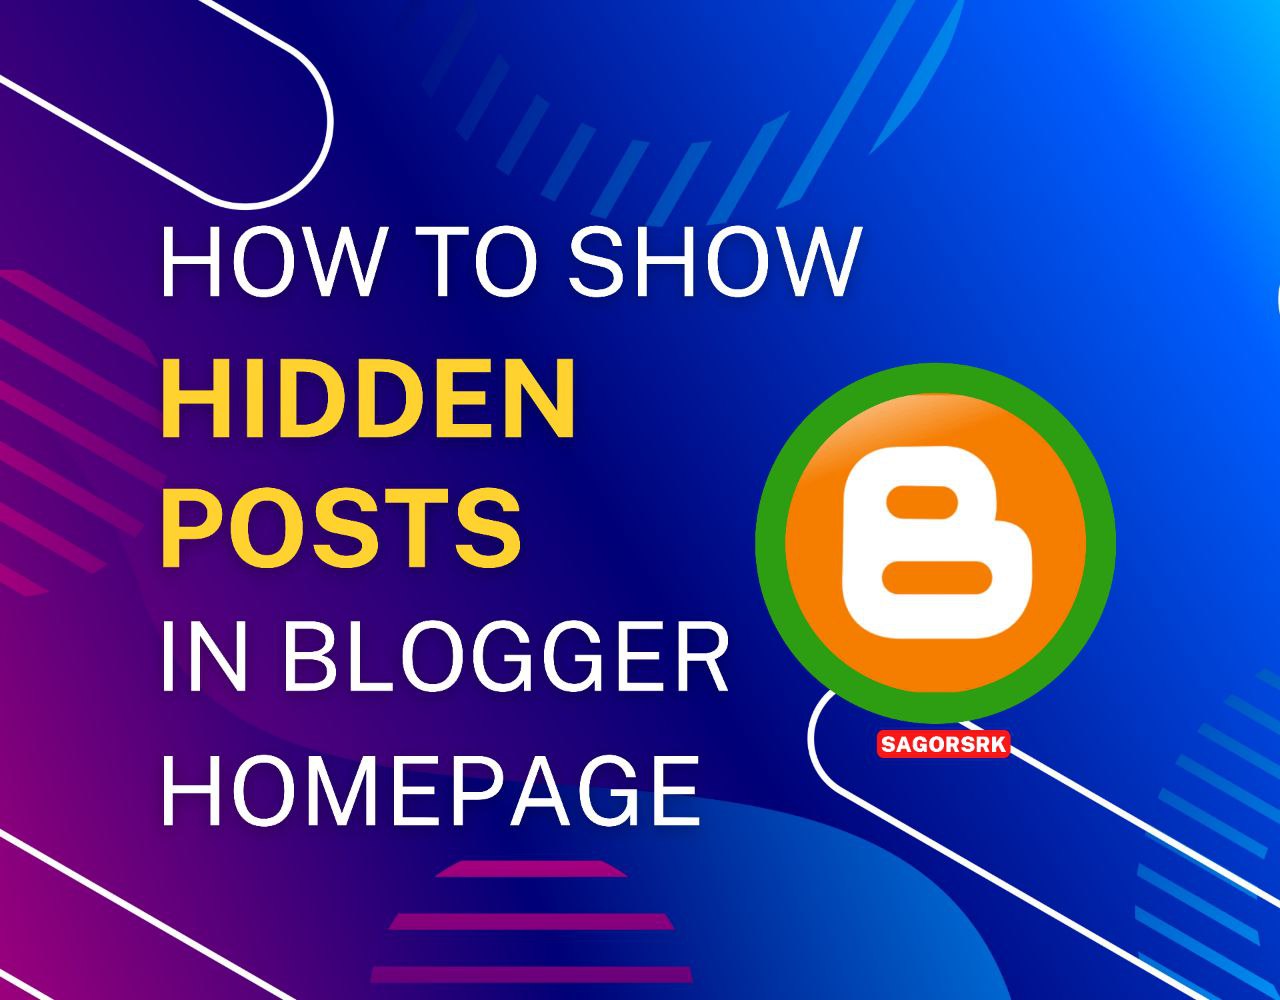 How to Show All Hidden Post in Blogger Homepage